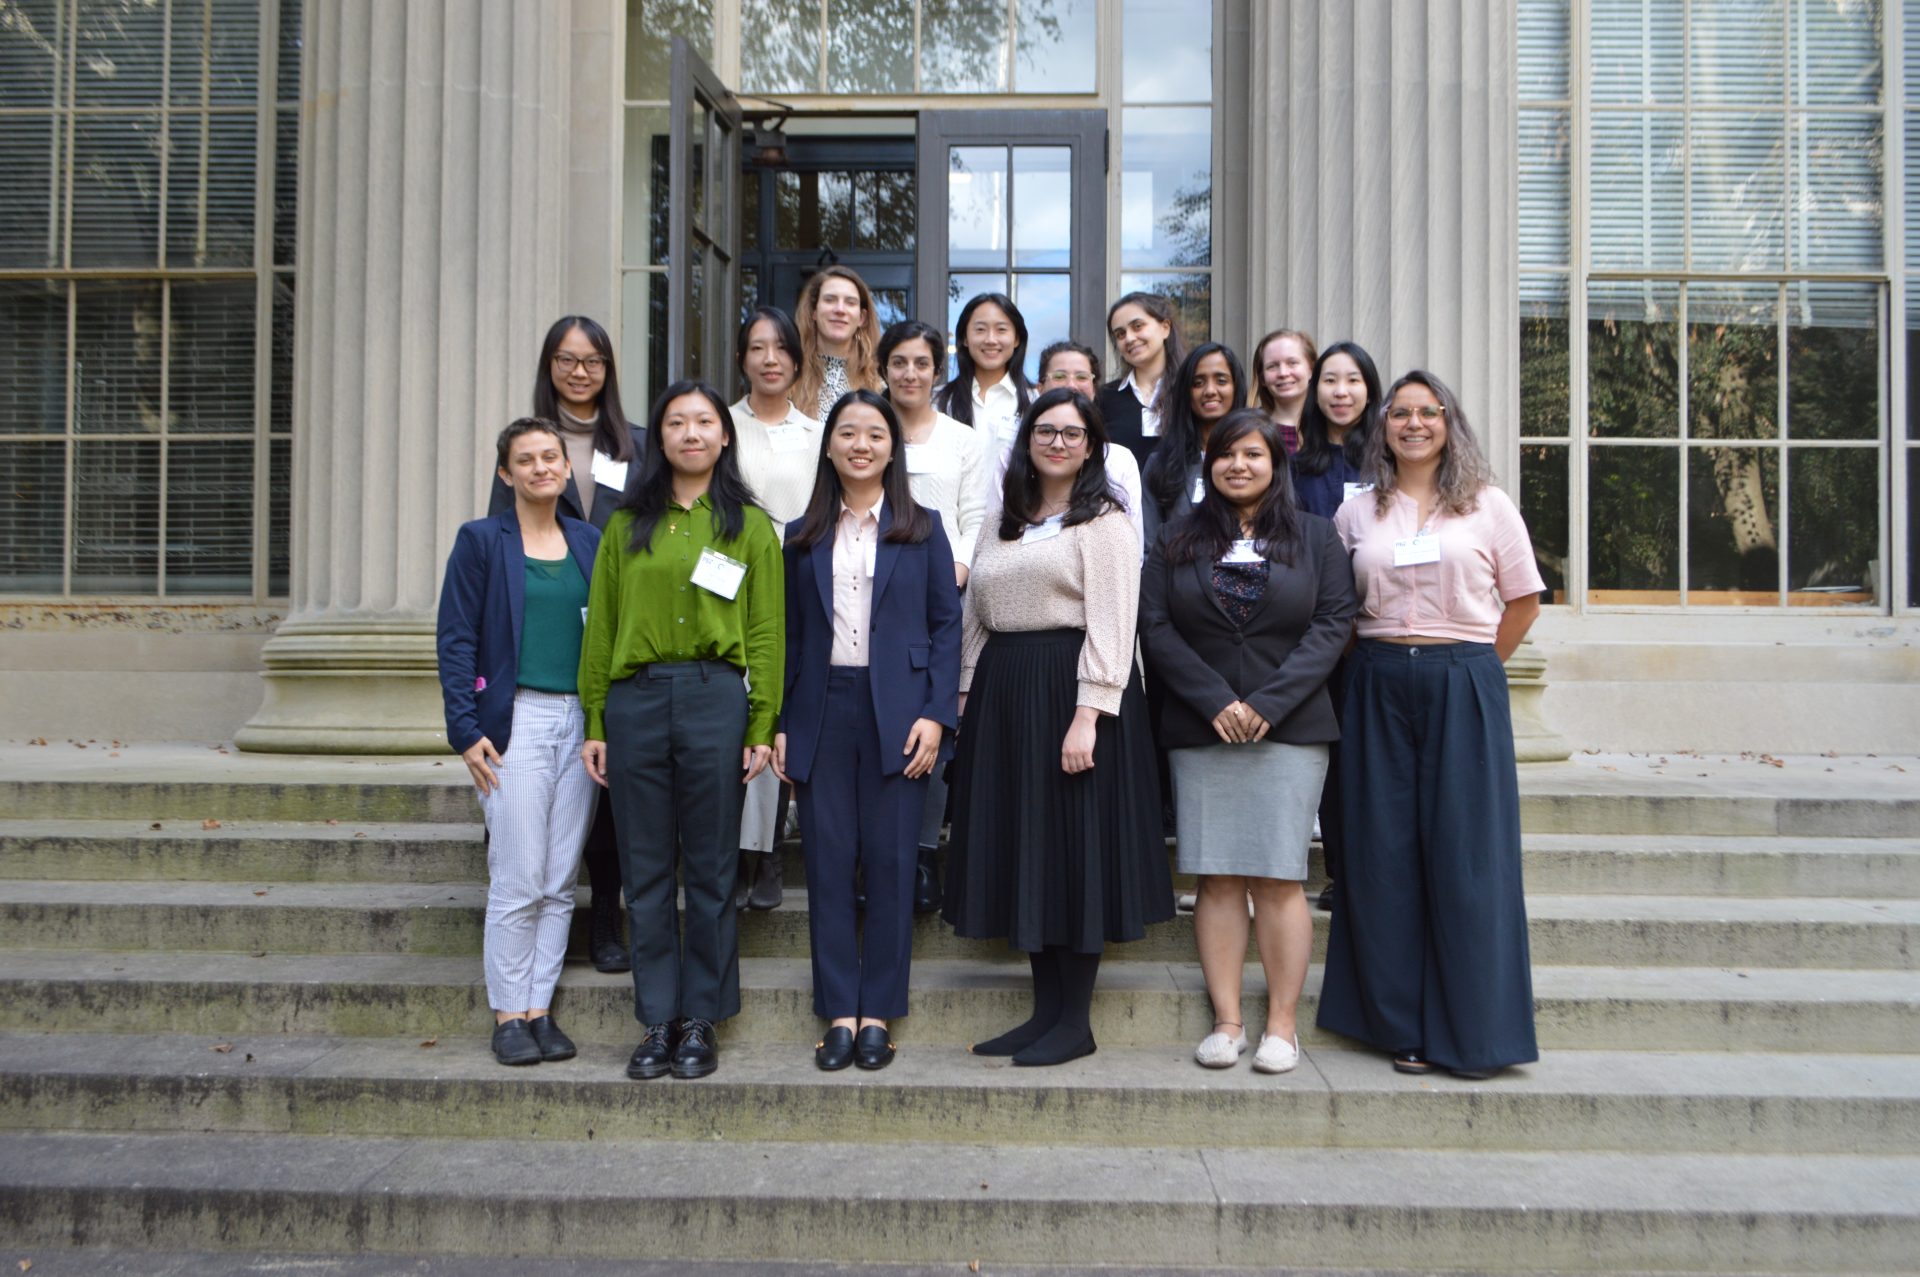 Rising Stars Workshop brings together the next generation of women leaders in CEE